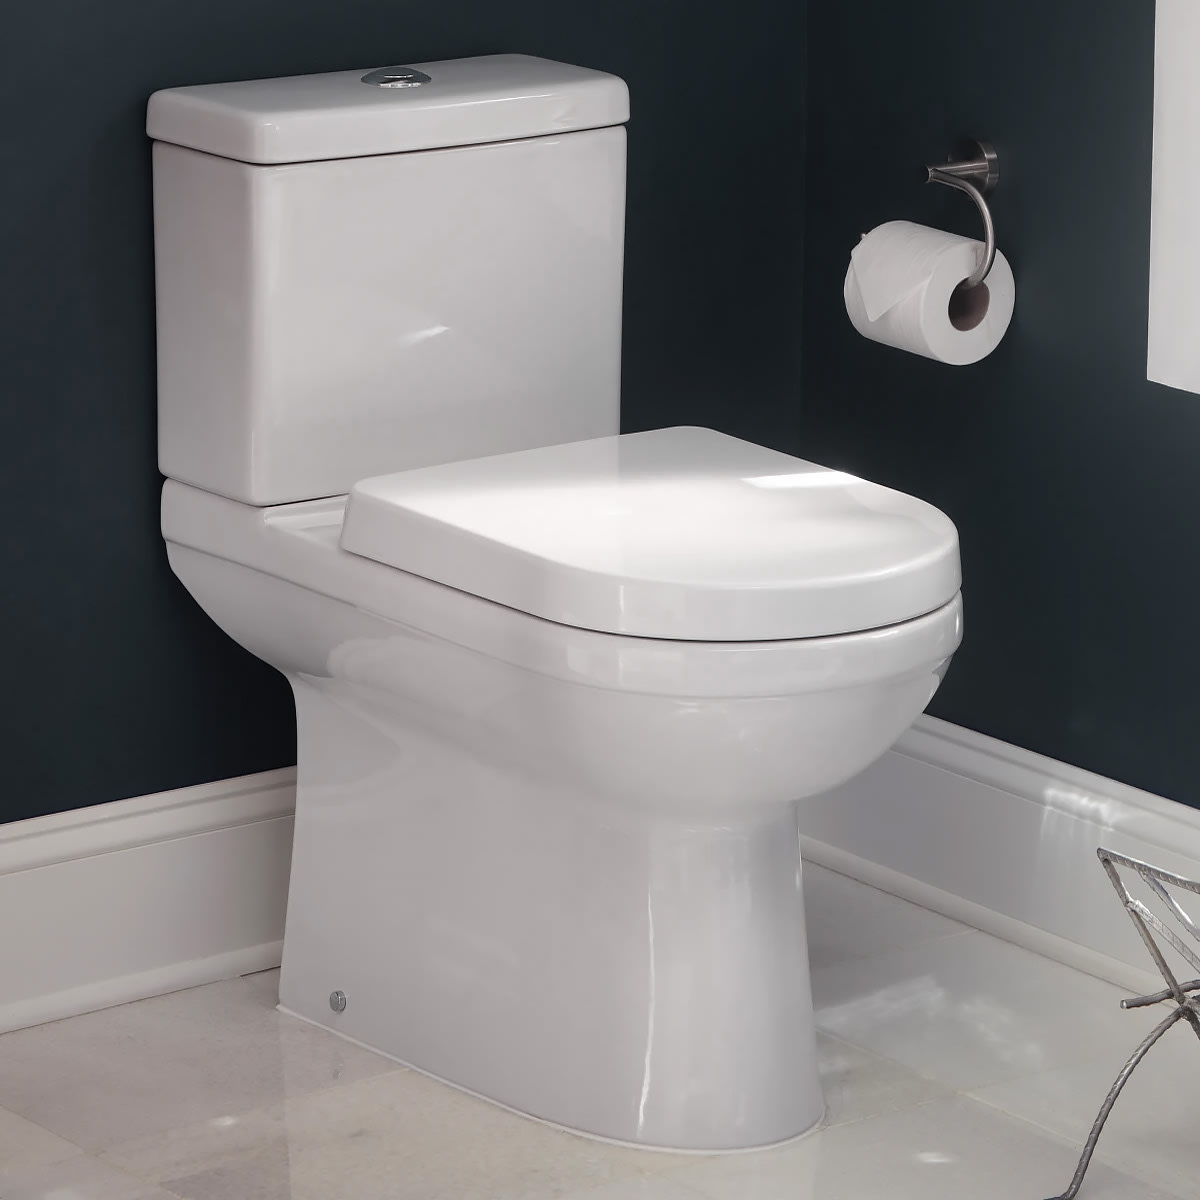 Details about   Close Coupled Bathroom Toilet Modern White Square Ceramic Soft Close Seat WC NDT 